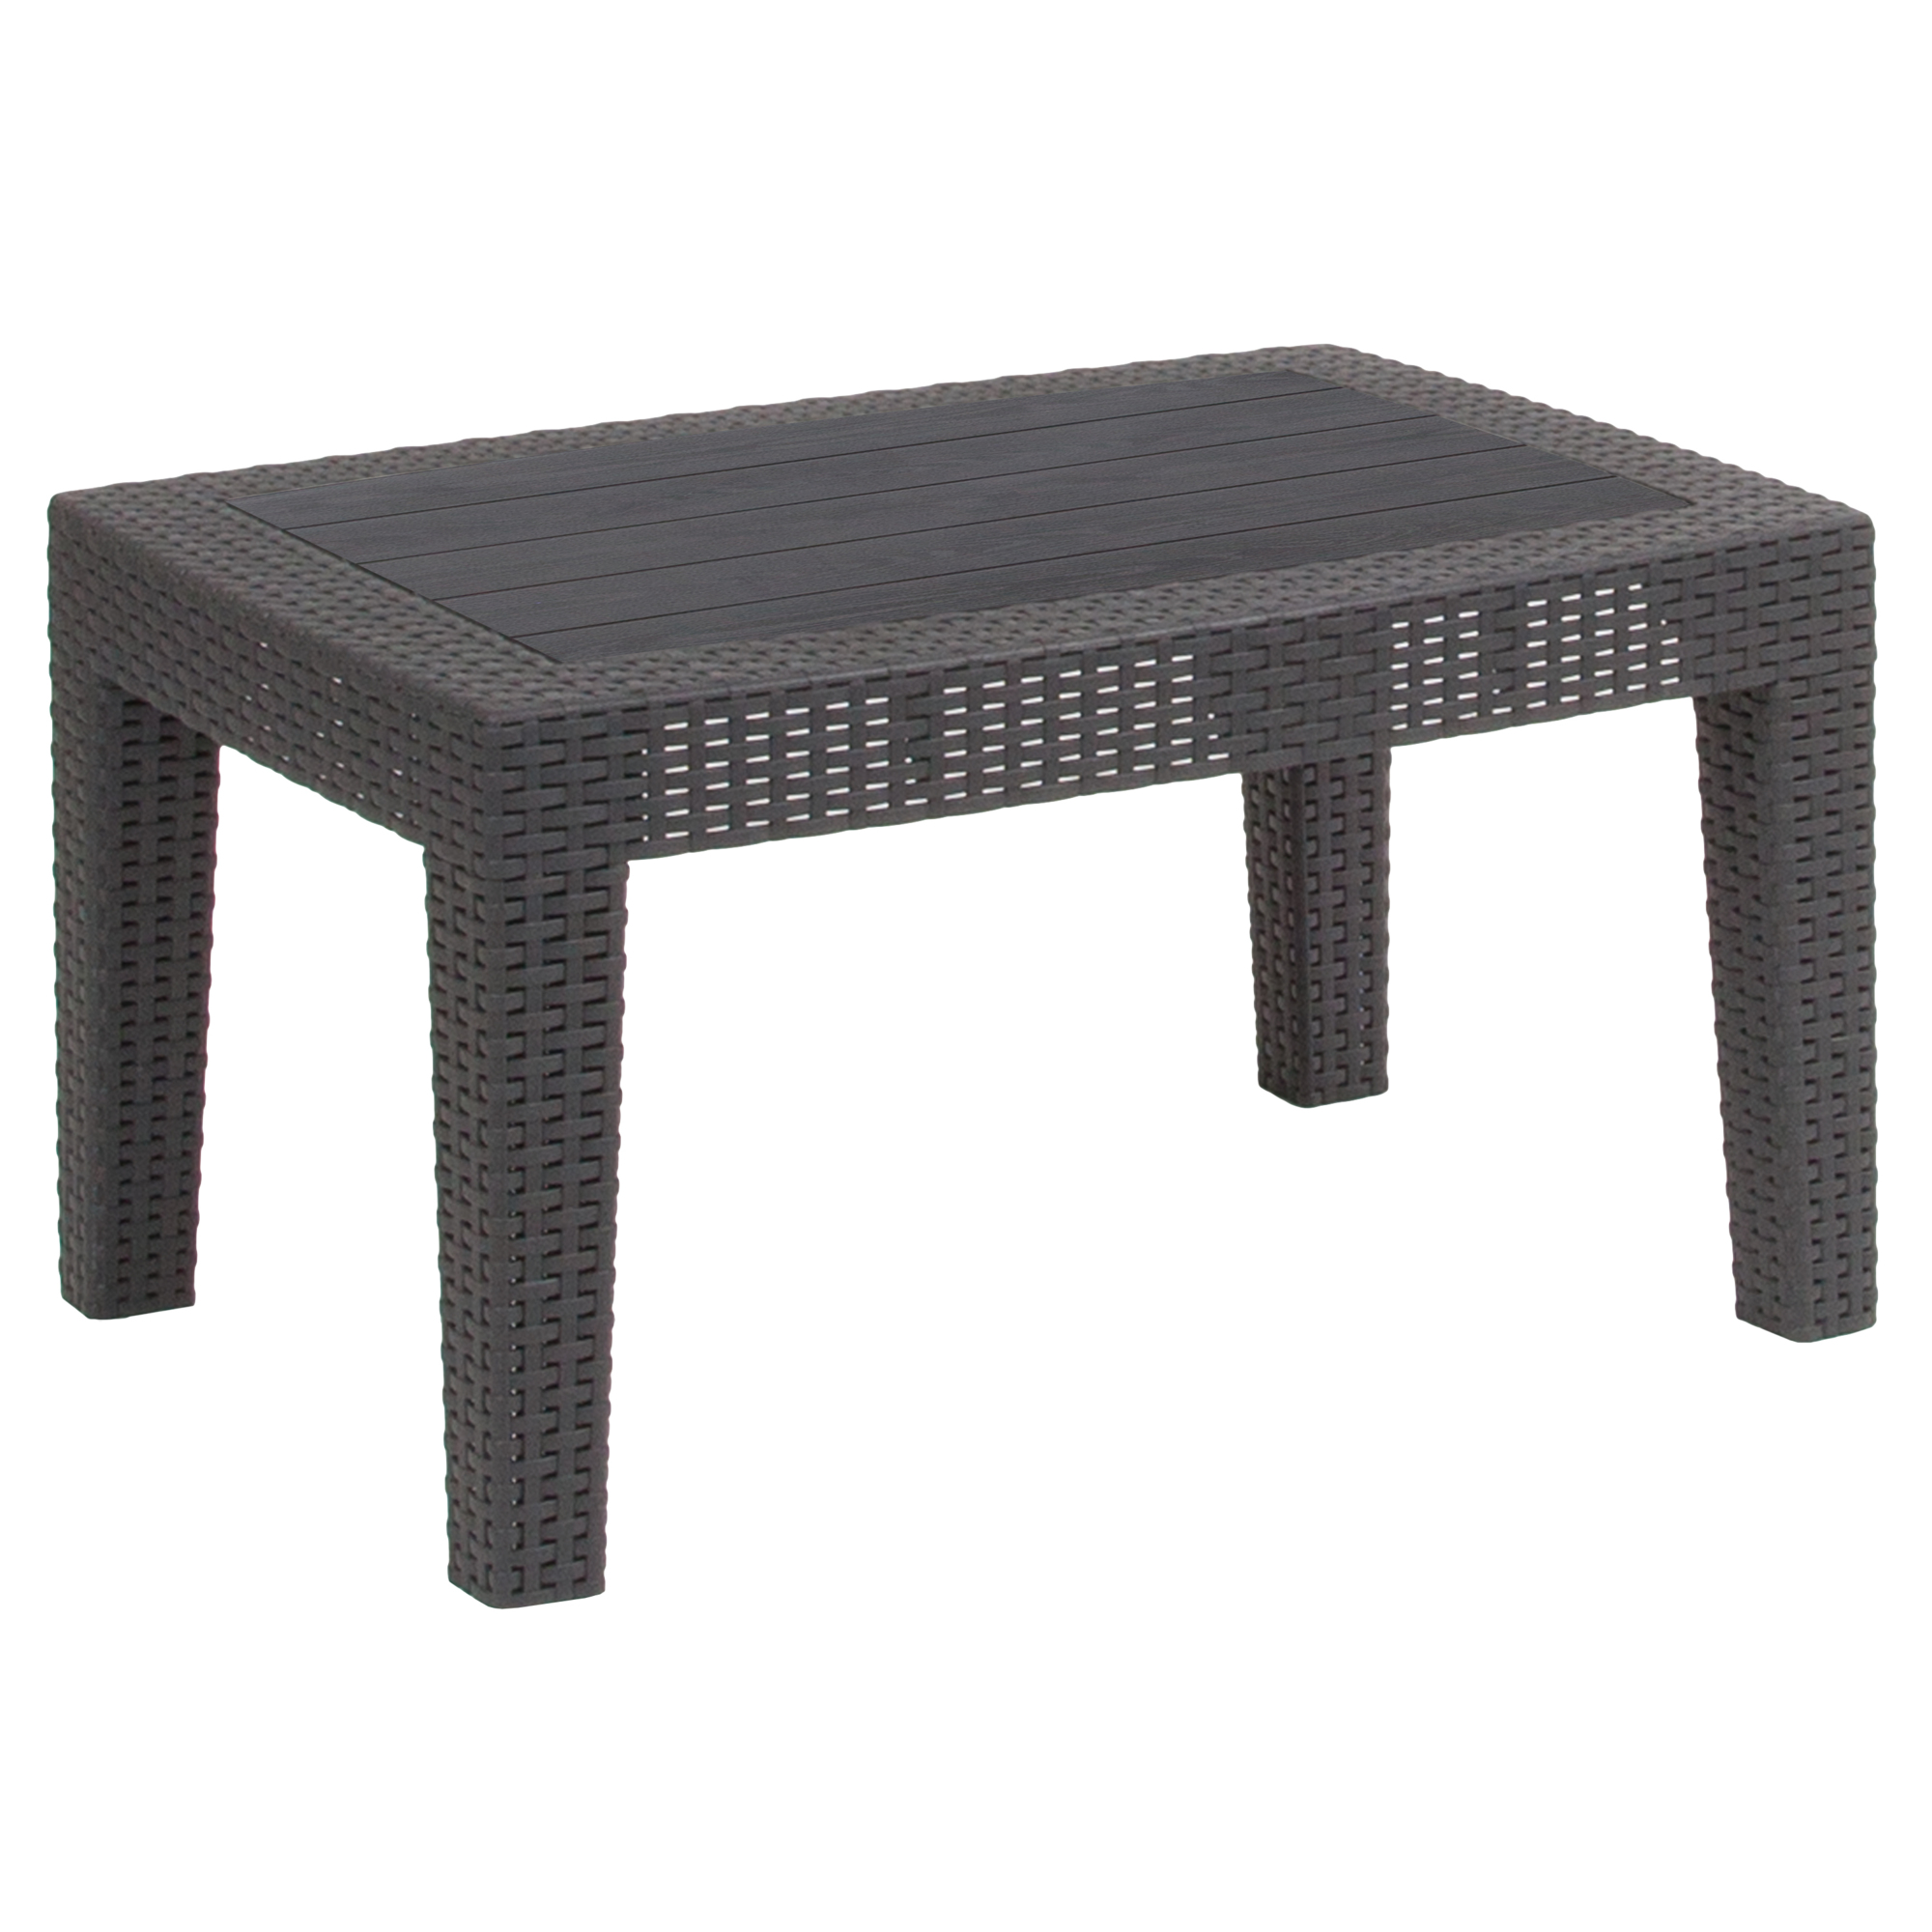 Flash Furniture, Dark Gray Faux Rattan Coffee Table - Patio Table, Table Shape Rectangle, Primary Color Gray, Height 15 in, Model DADSF2TDKGY